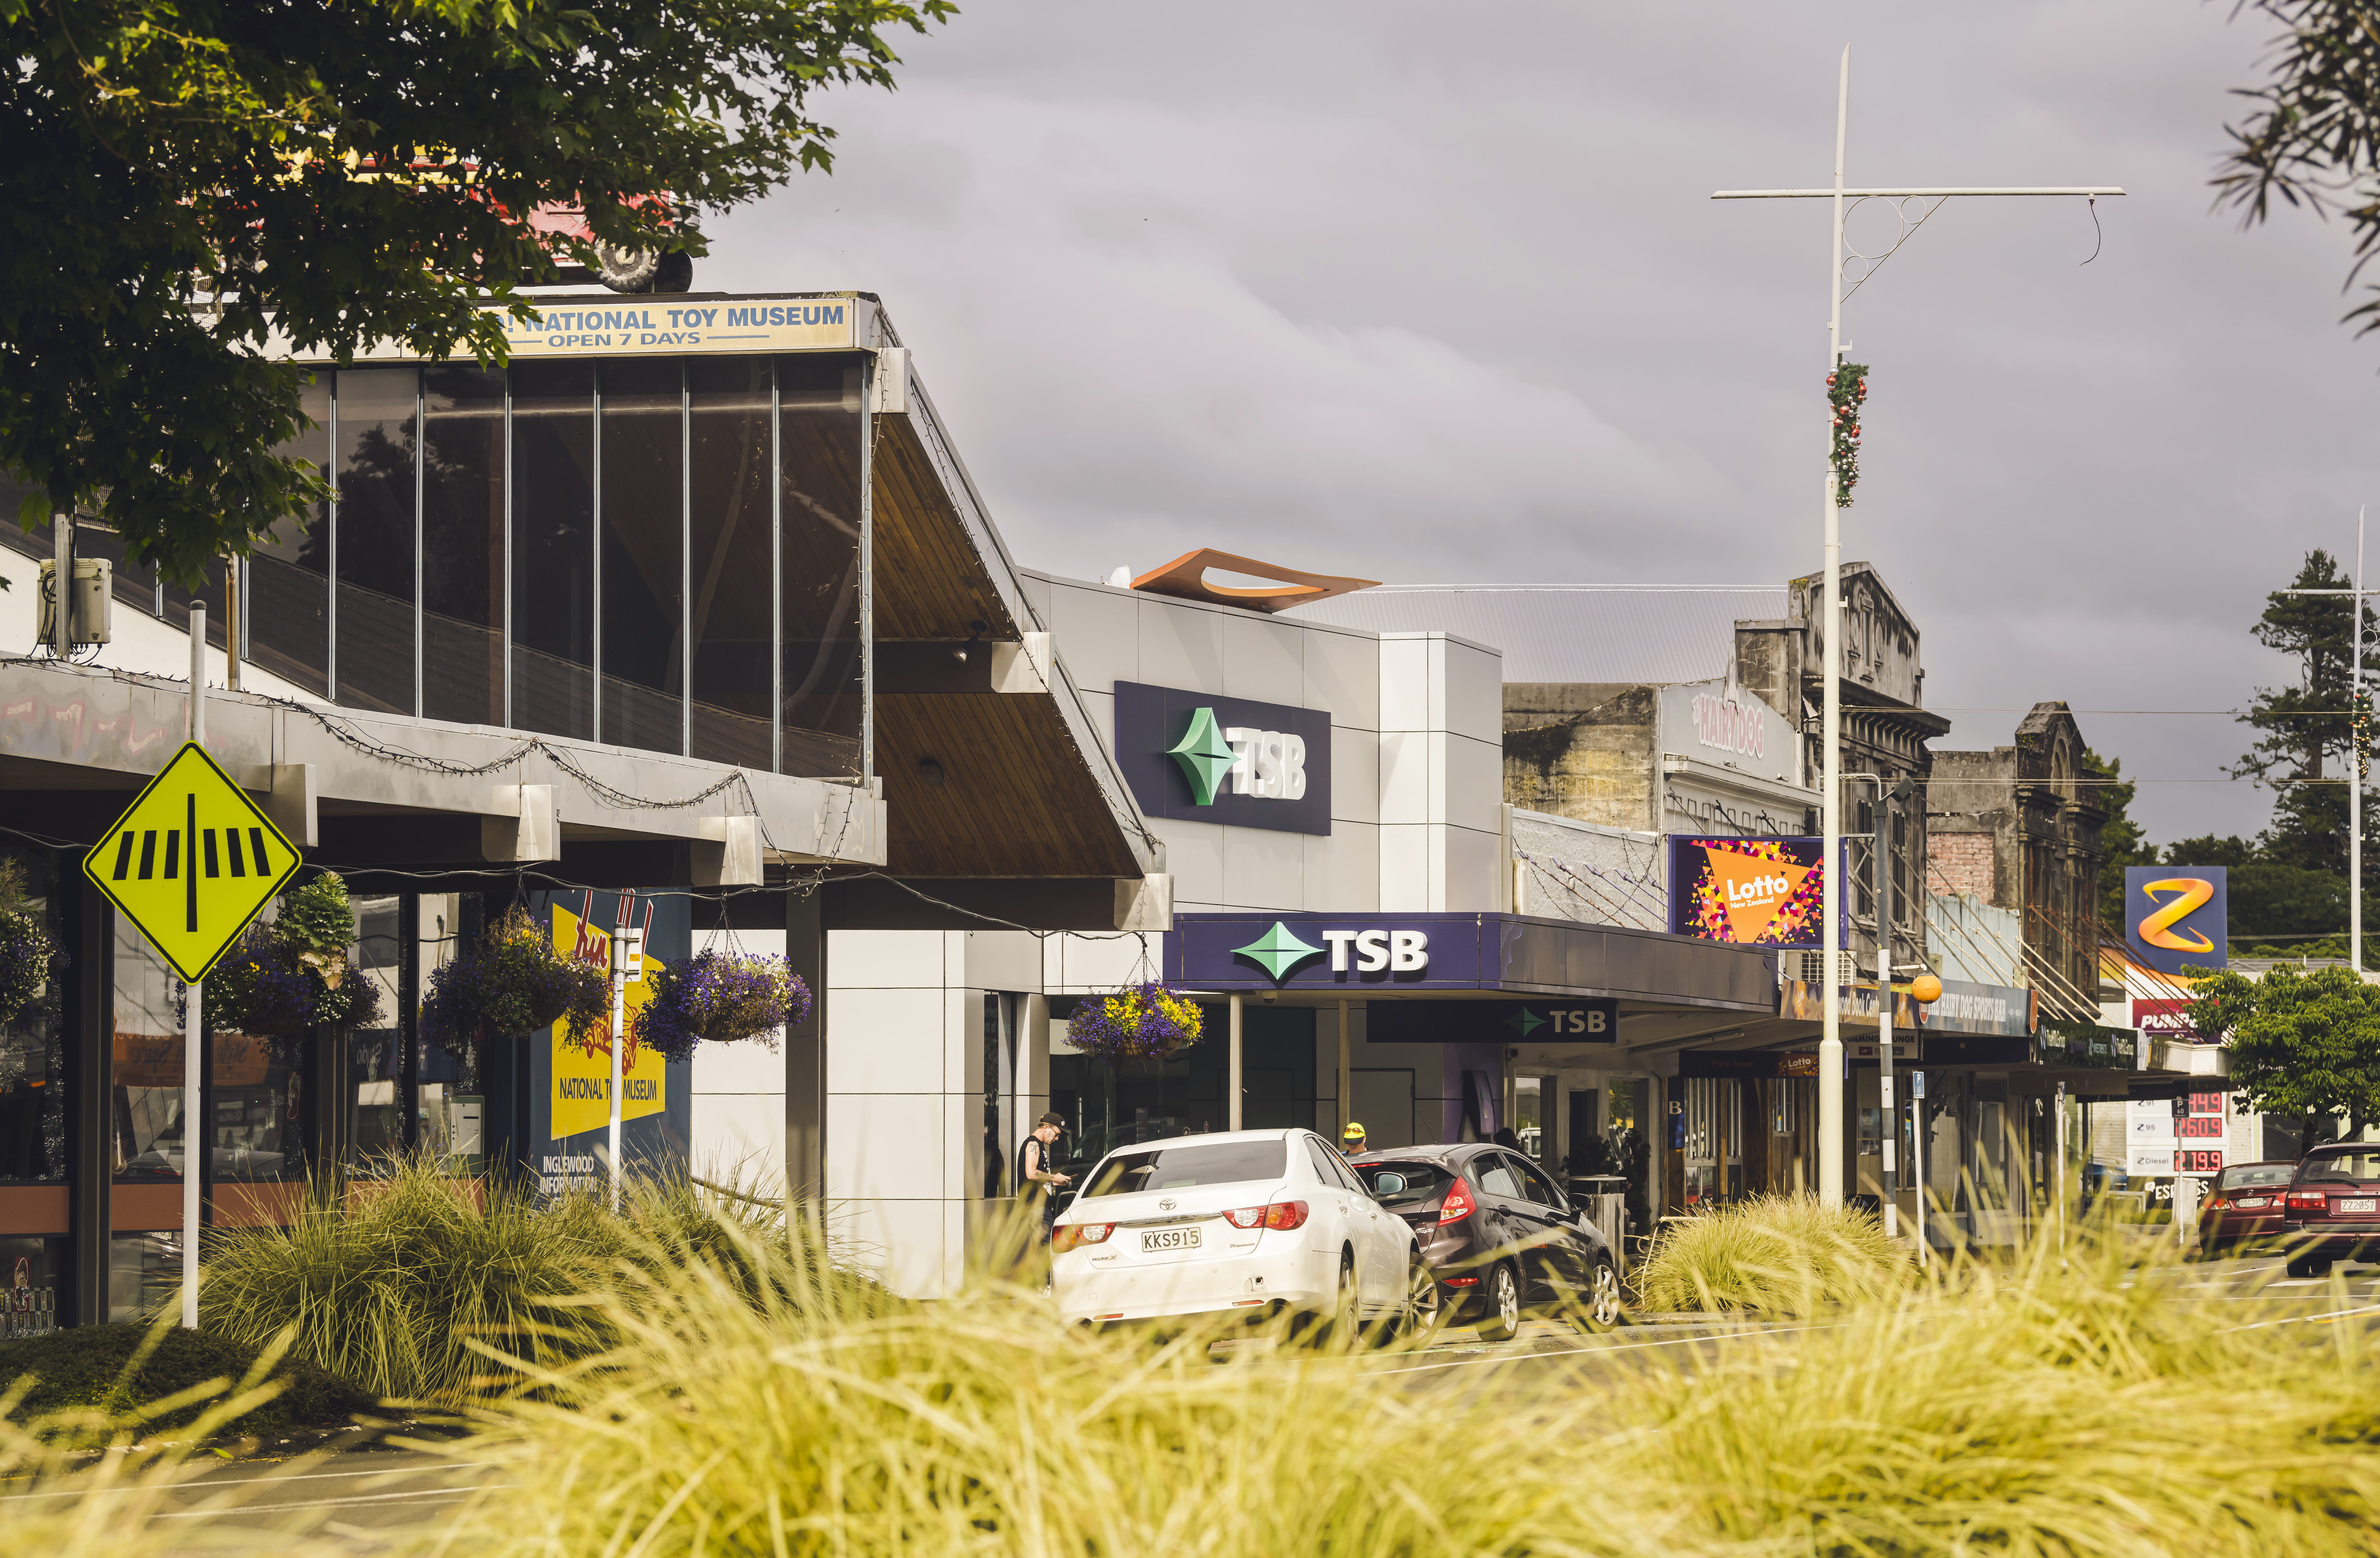 Street view of Inglewood with shops.